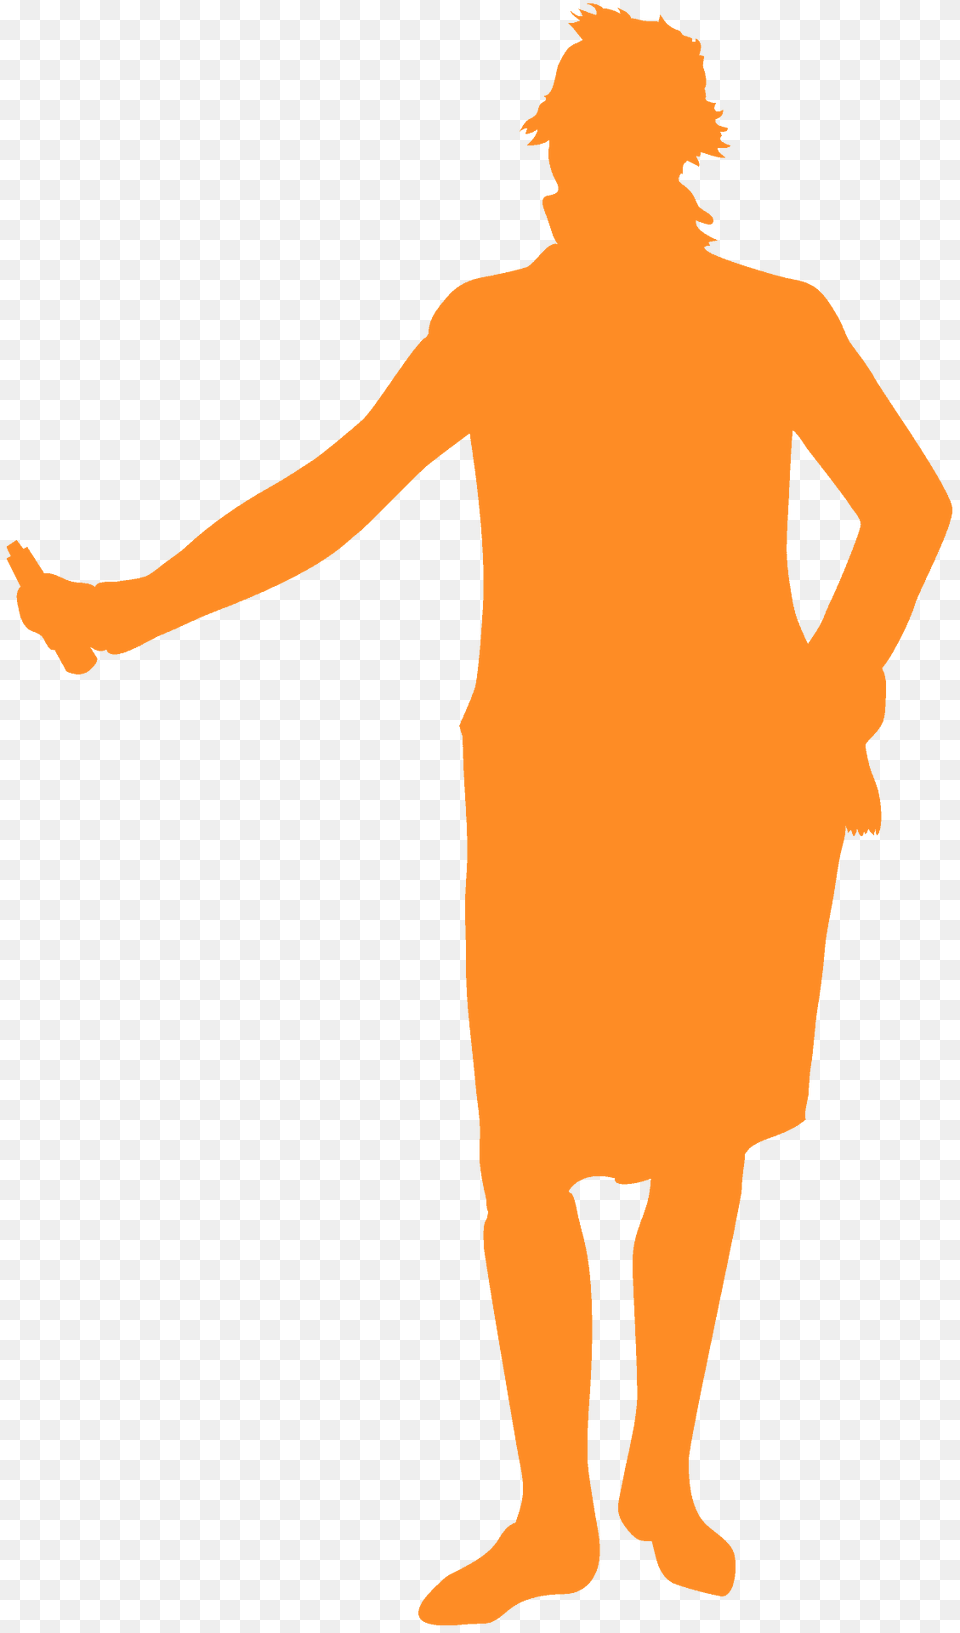 George Washington Silhouette, Adult, Male, Man, Person Png